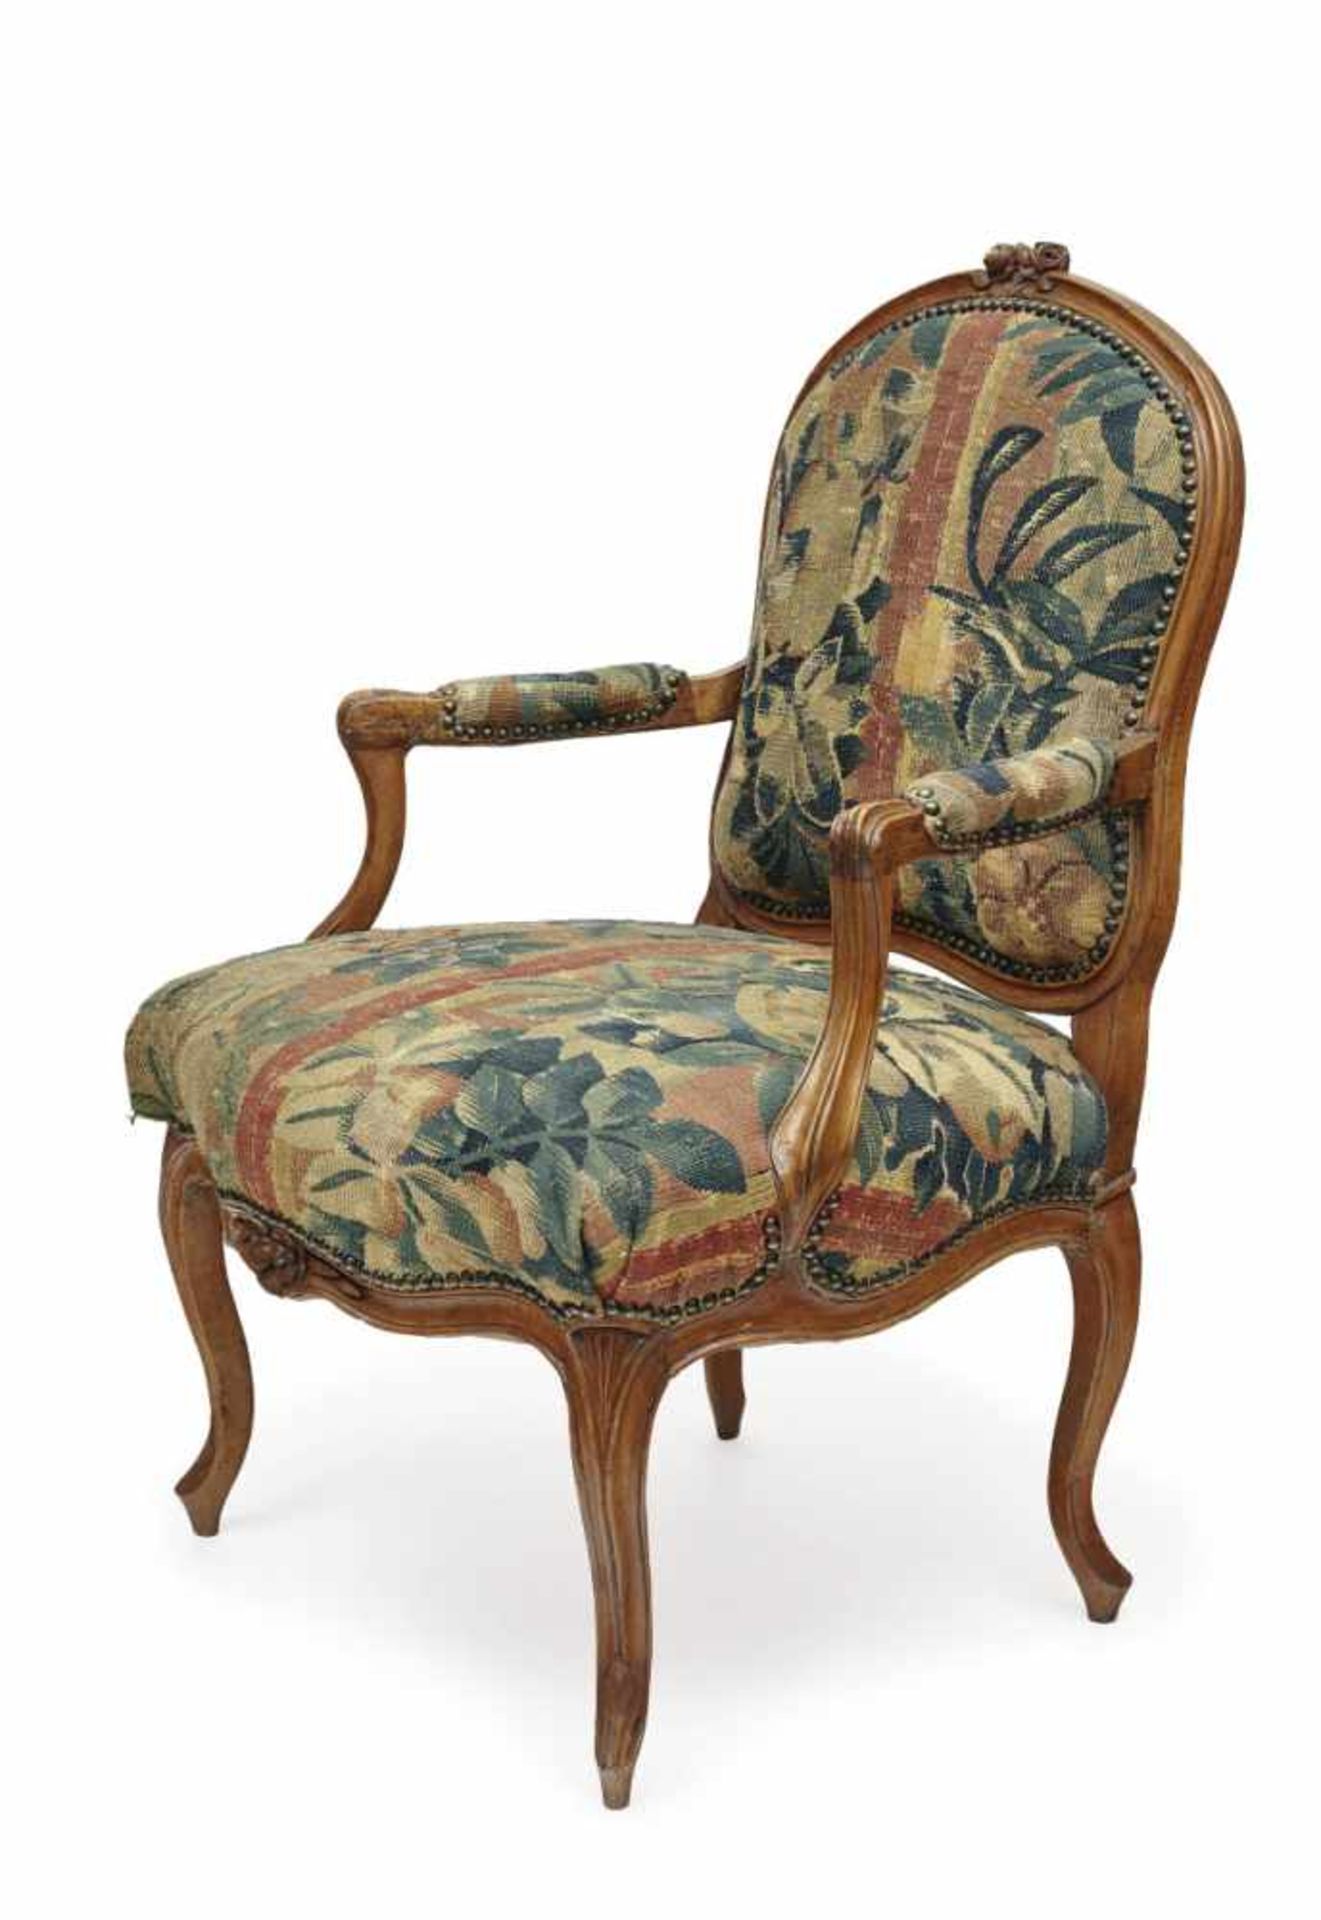 A FauteuilItaly (?), 18th Century Walnut. Tapestry cover. Restored, additions, scuffed. 96 x 66 x 52